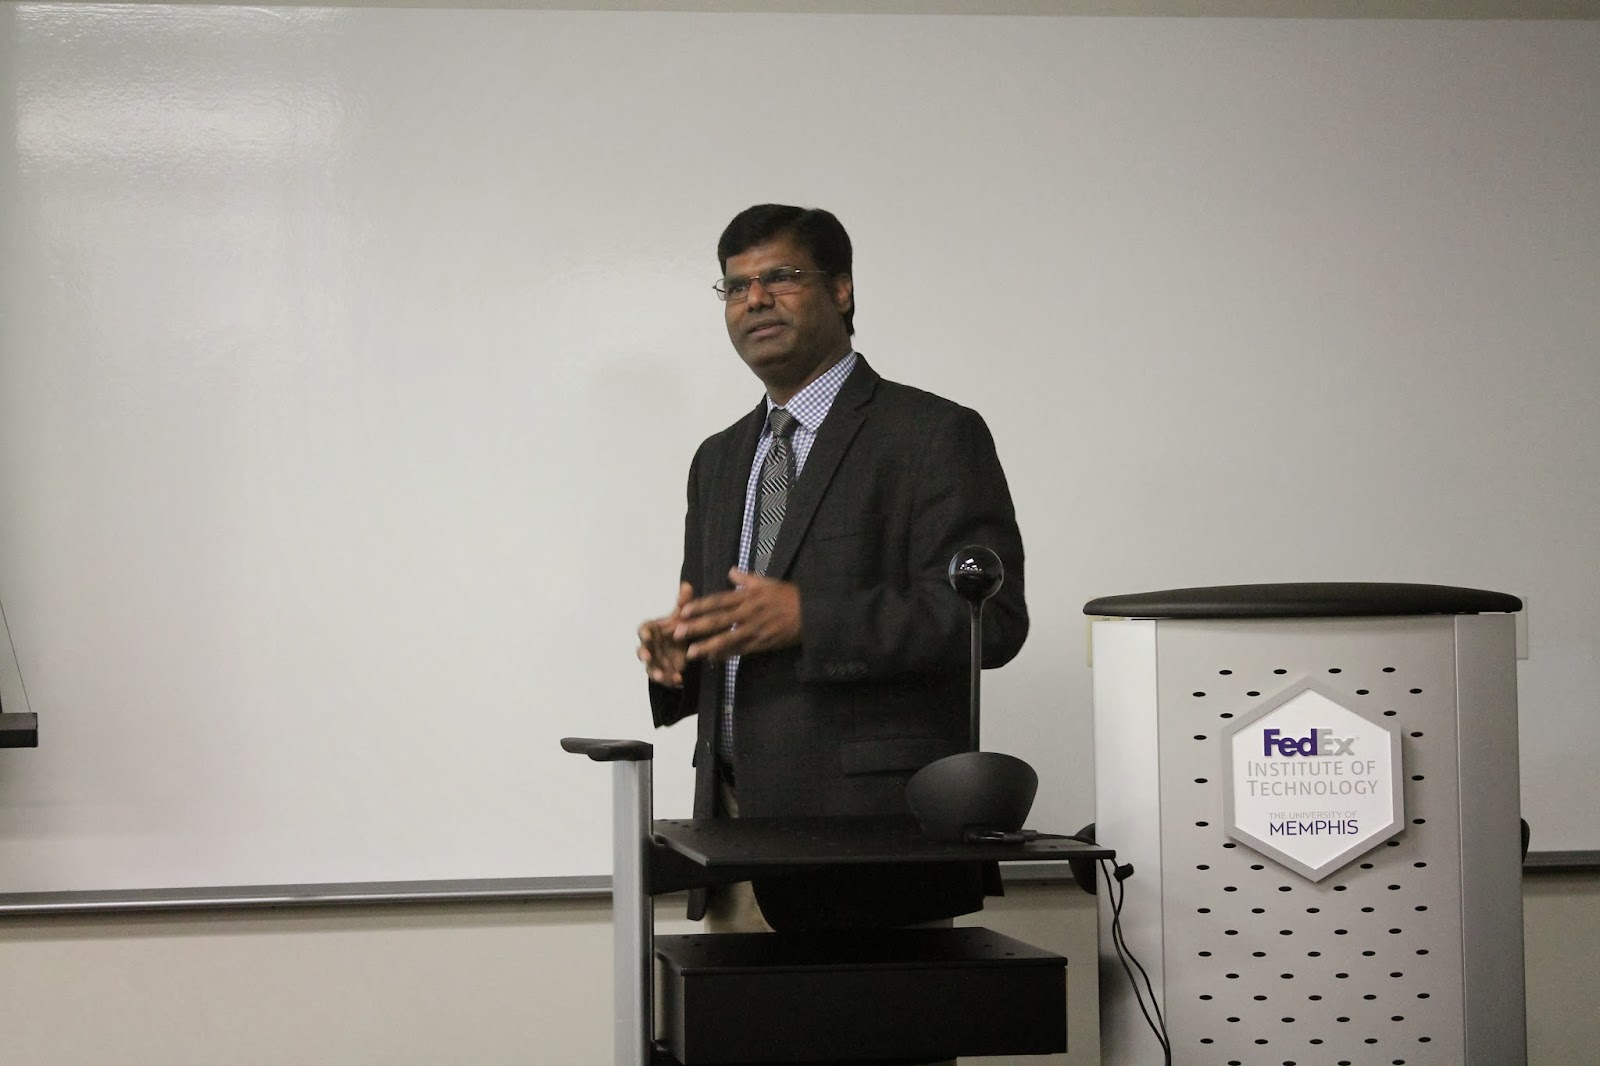 Dr. Ali is lecturing as an invited speaker at the Smart Grid Workshop held at Fedex Institute of UofM, October 17, 2013